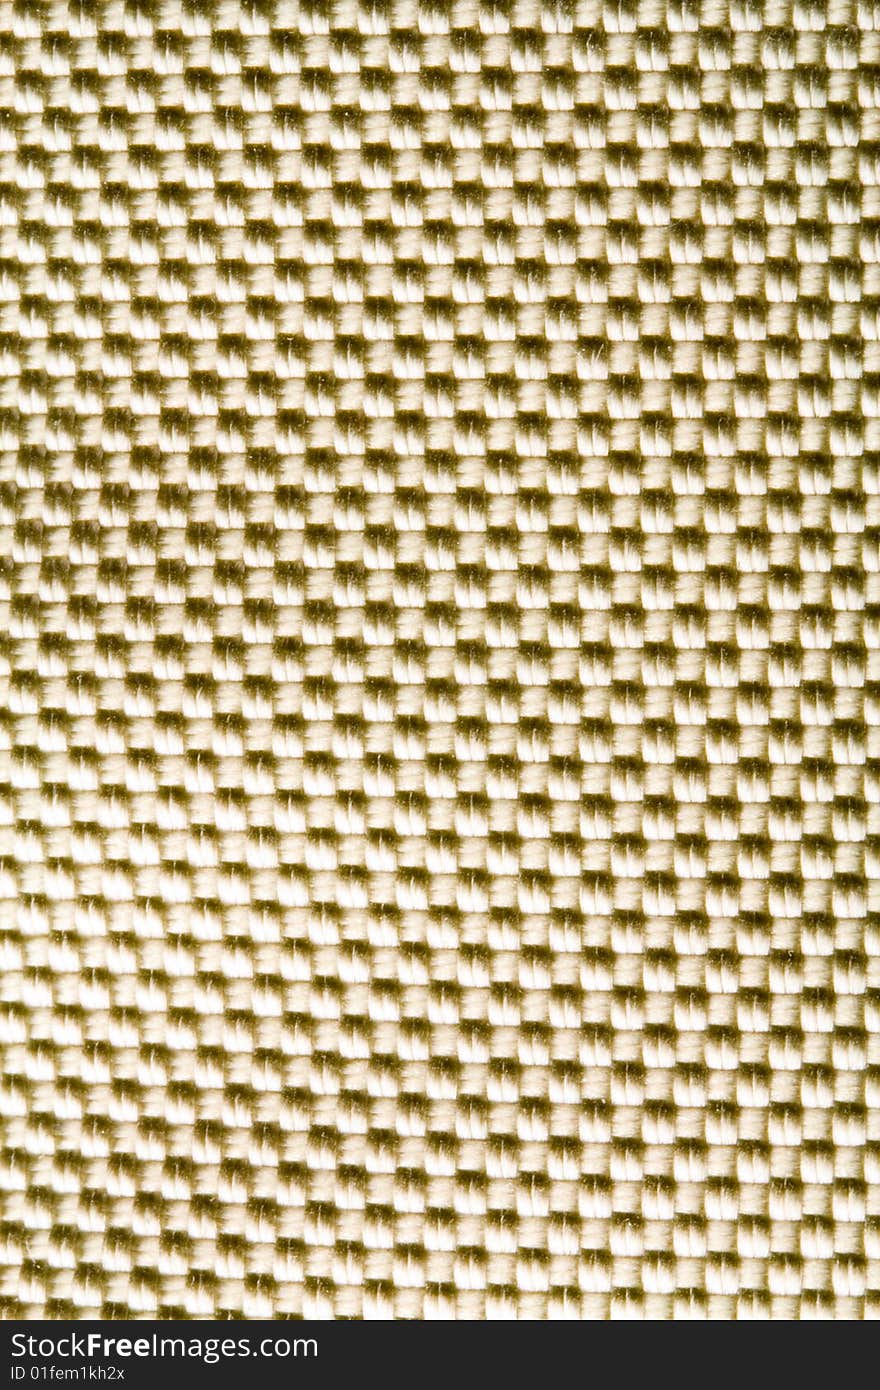 A close-up of the texture of grey nylon fabric. A close-up of the texture of grey nylon fabric